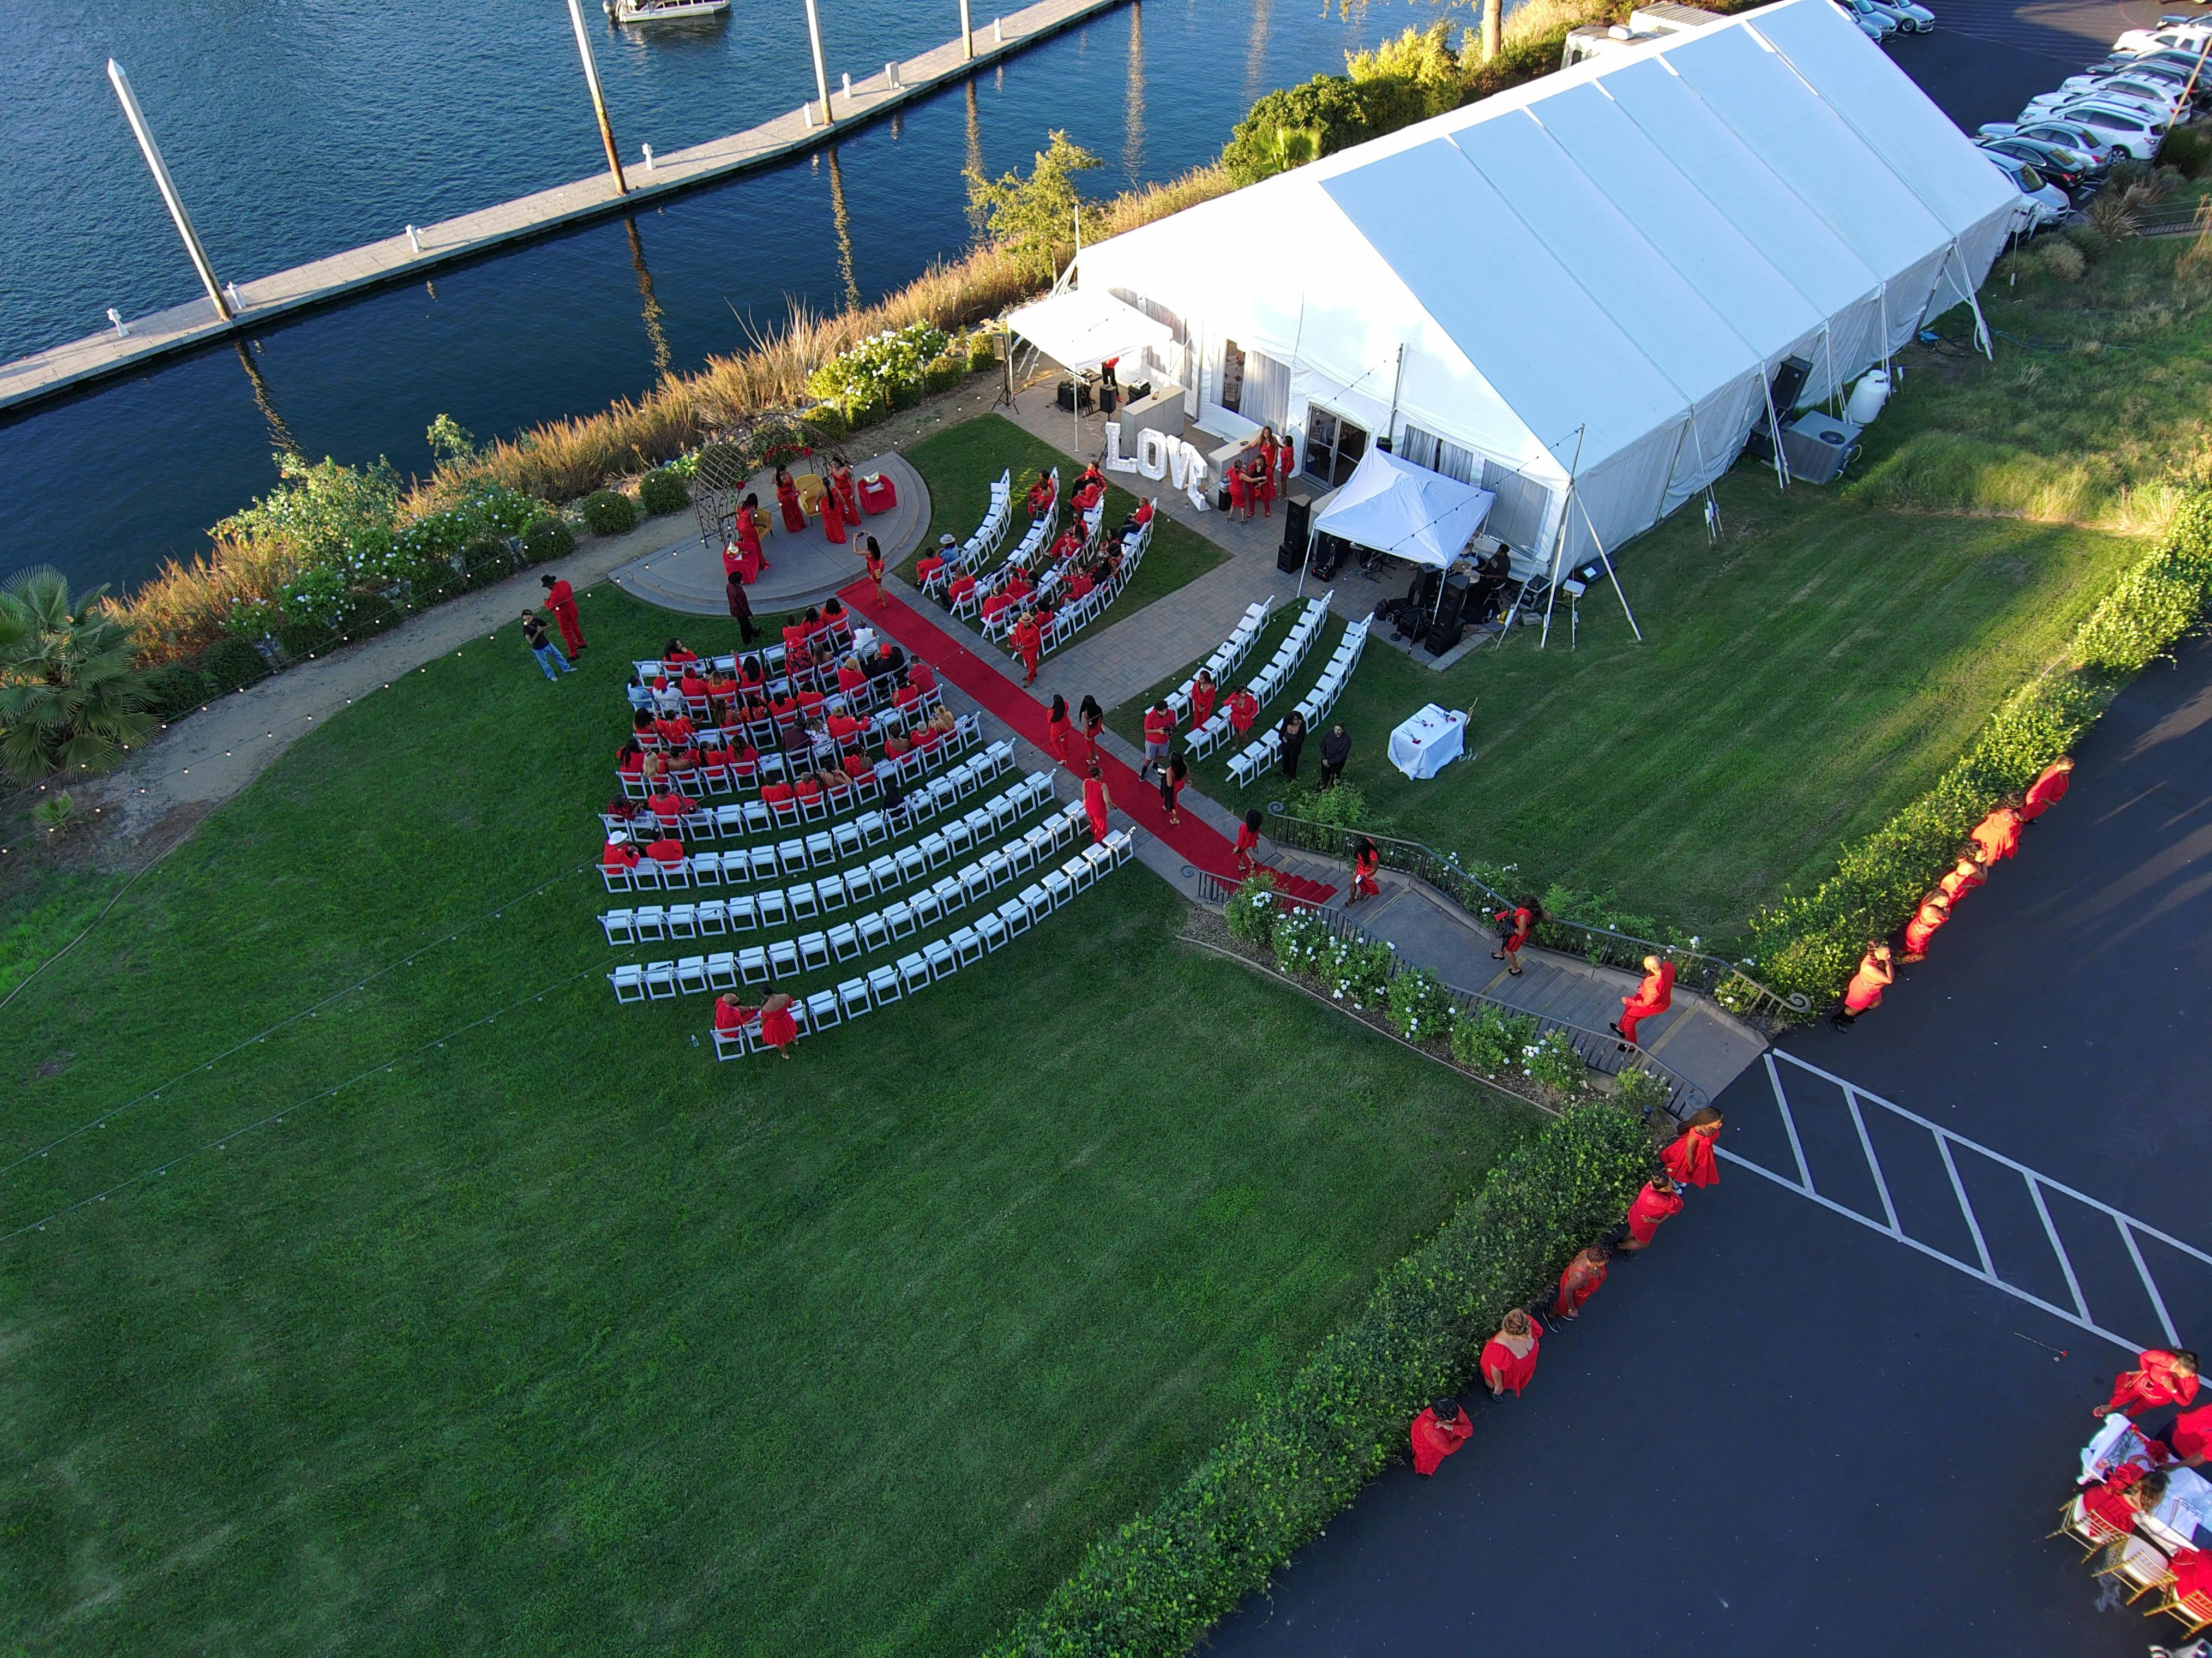 Turnkey Tent and Event Rental Business on the Market